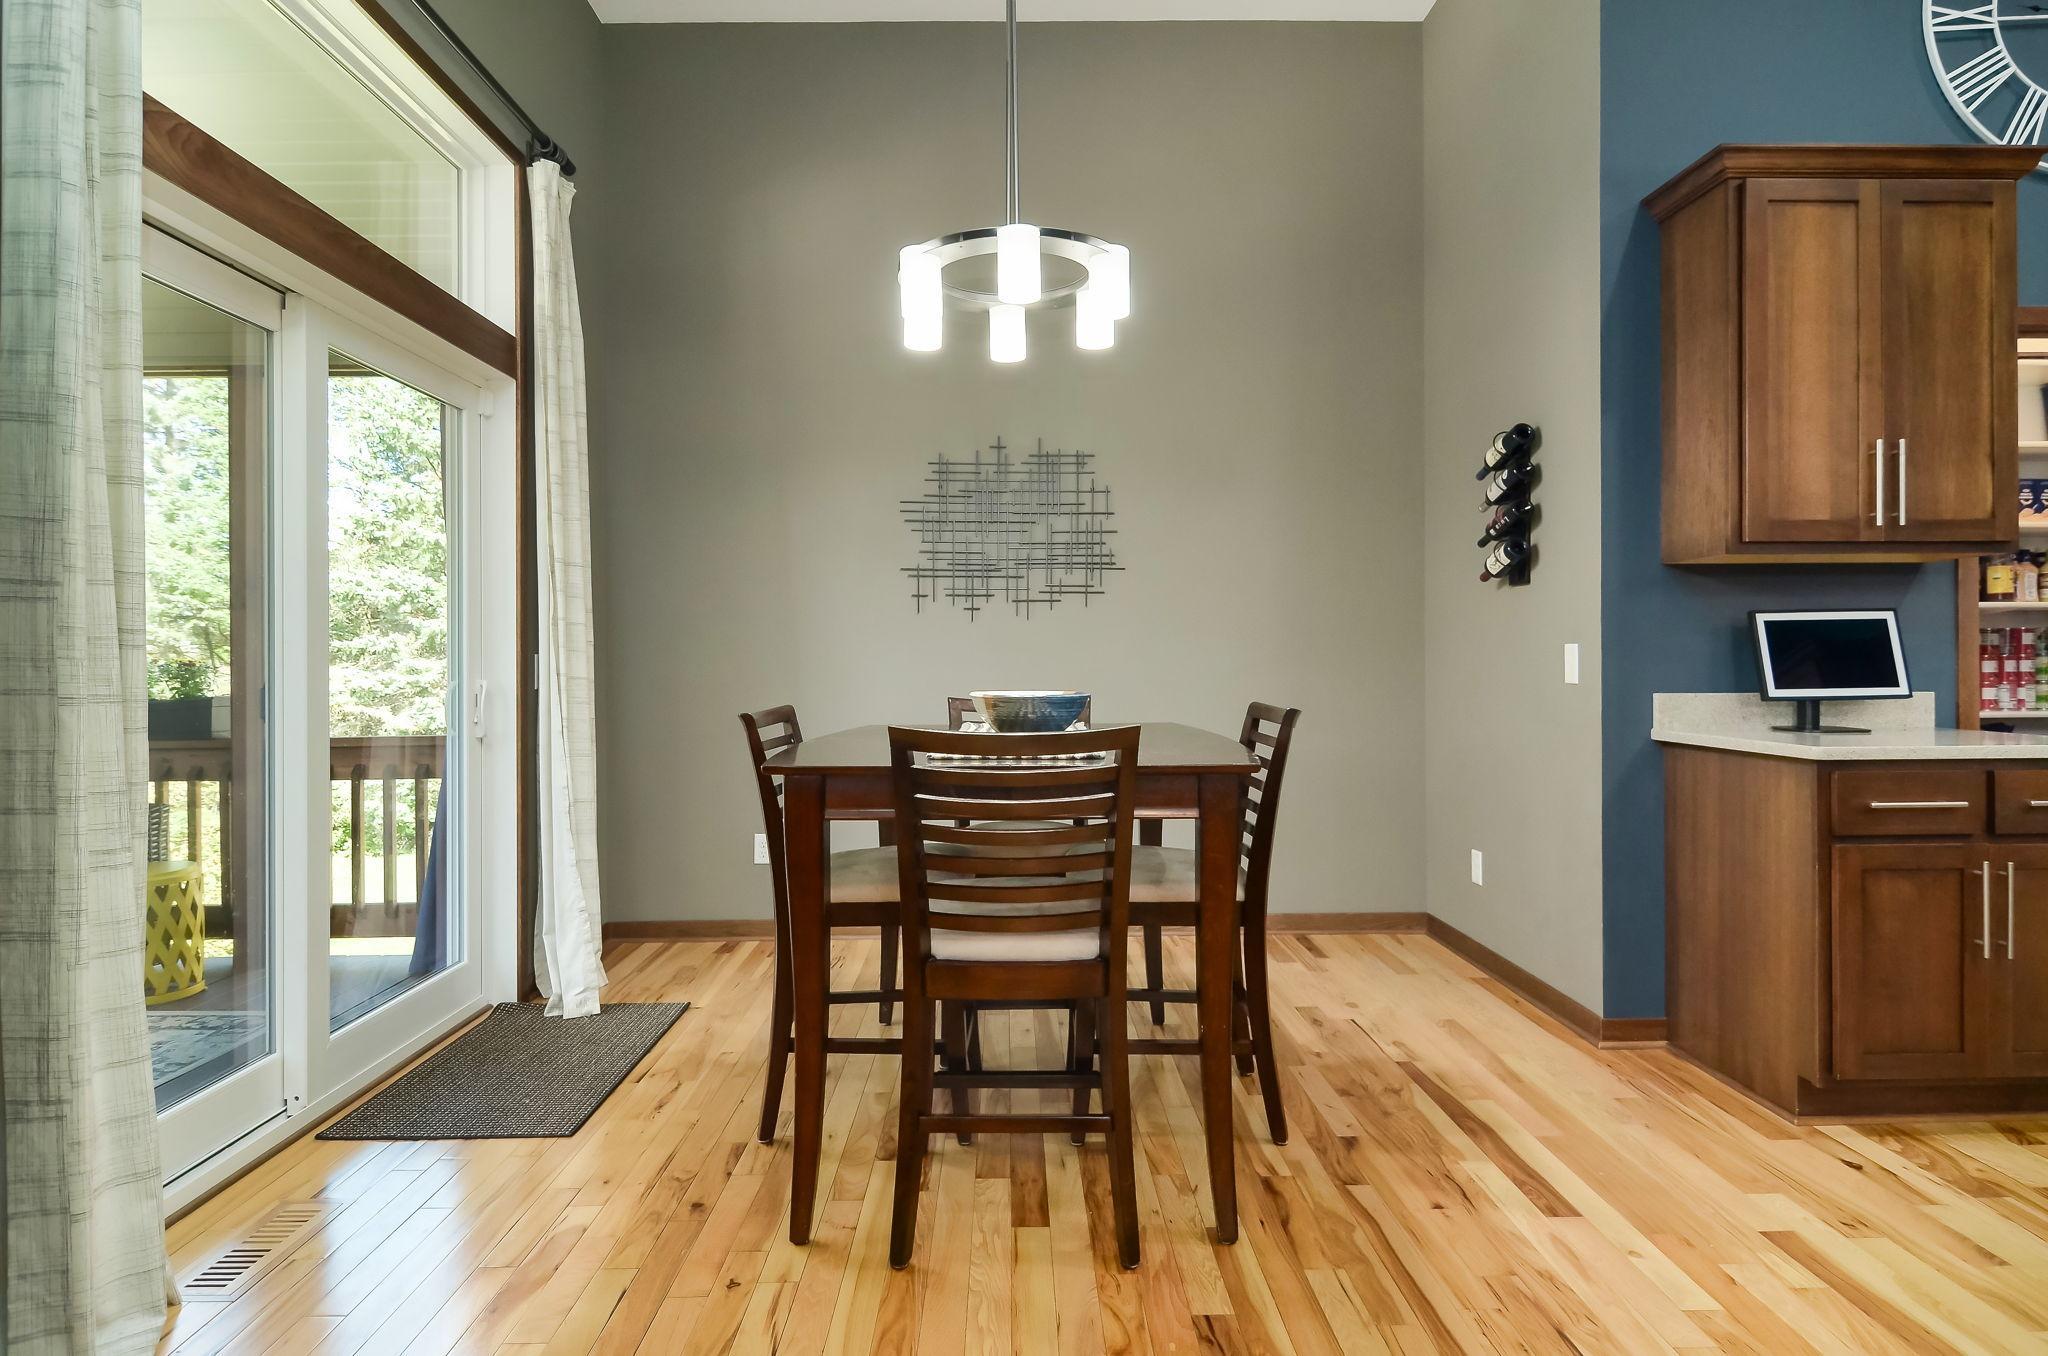 Roomy dining area is perfect for weeknight meals but also large enough to host holidays.